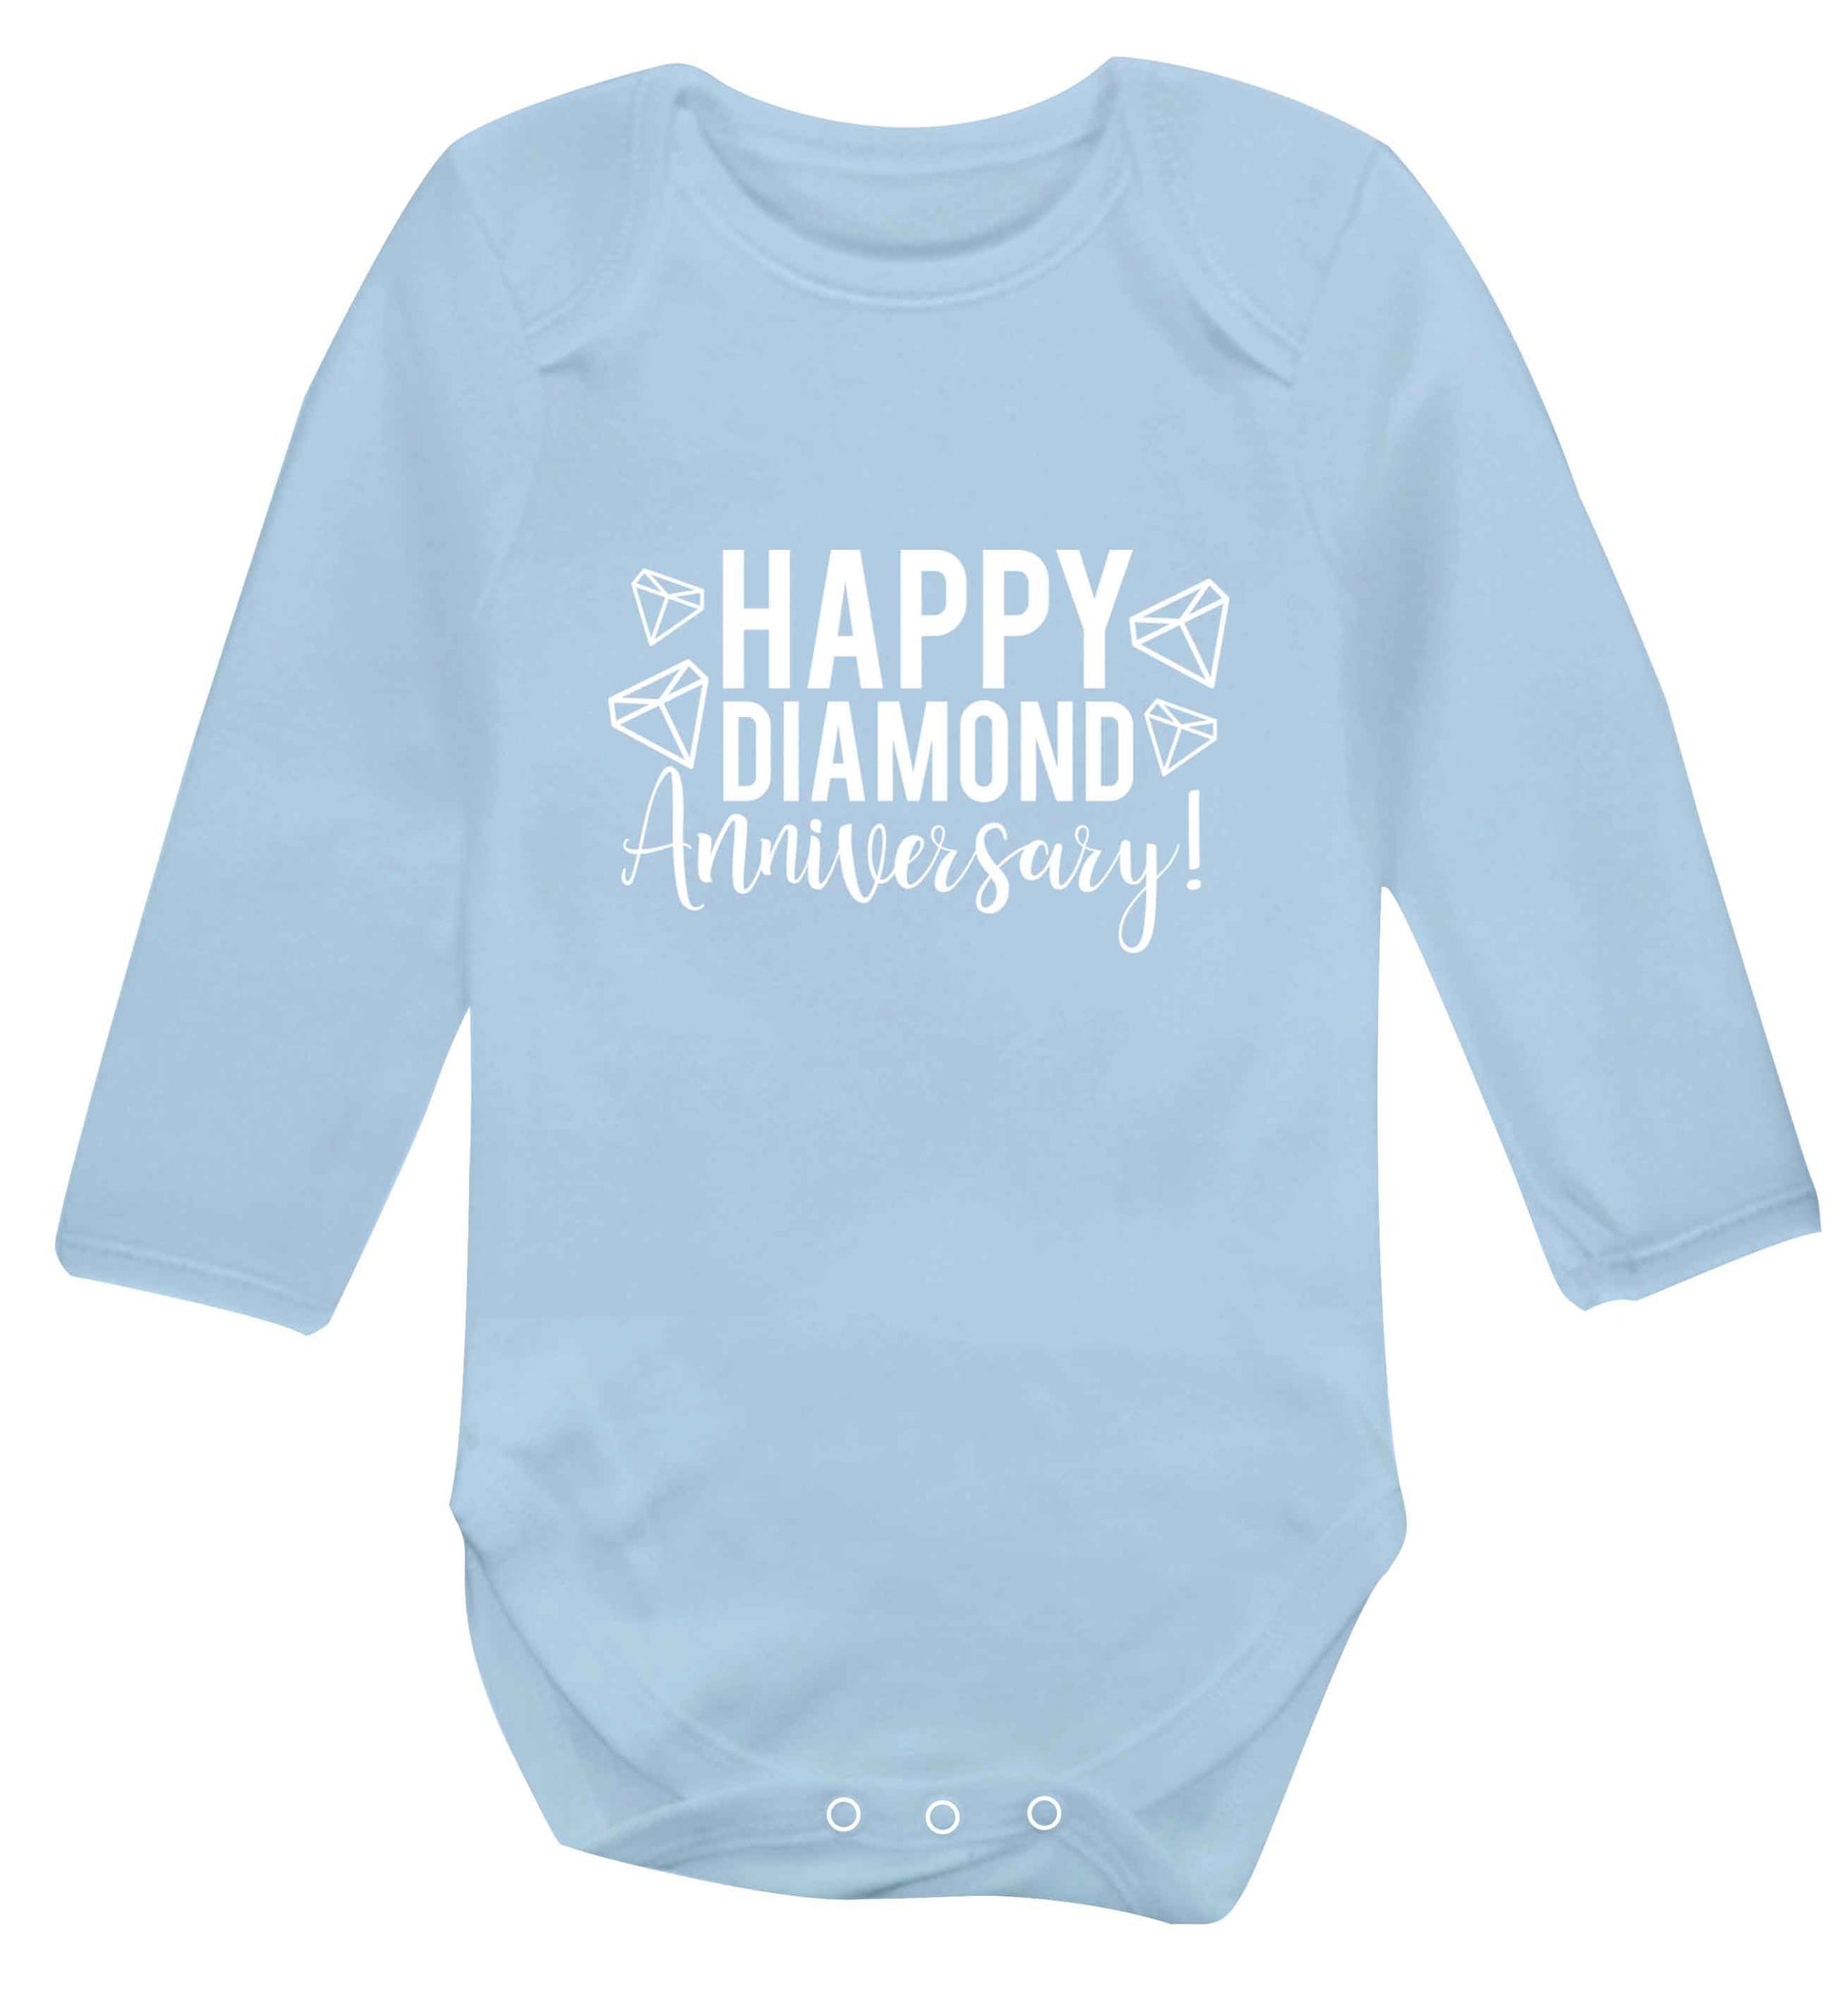 Happy diamond anniversary! baby vest long sleeved pale blue 6-12 months